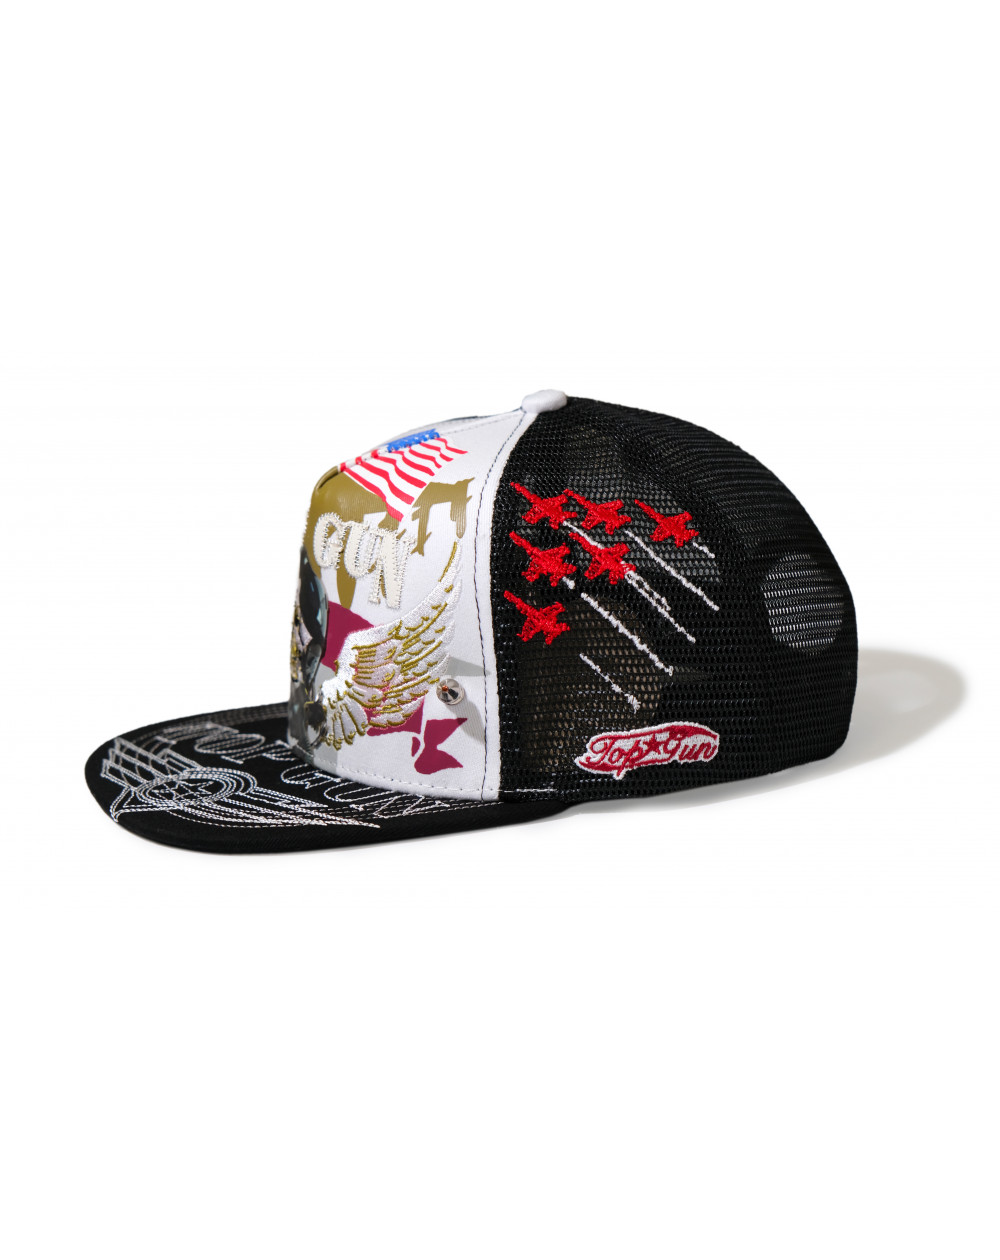 TOP GUN® EXCLUSIVE - White Trucker Snap / Limited & Numbered Edition